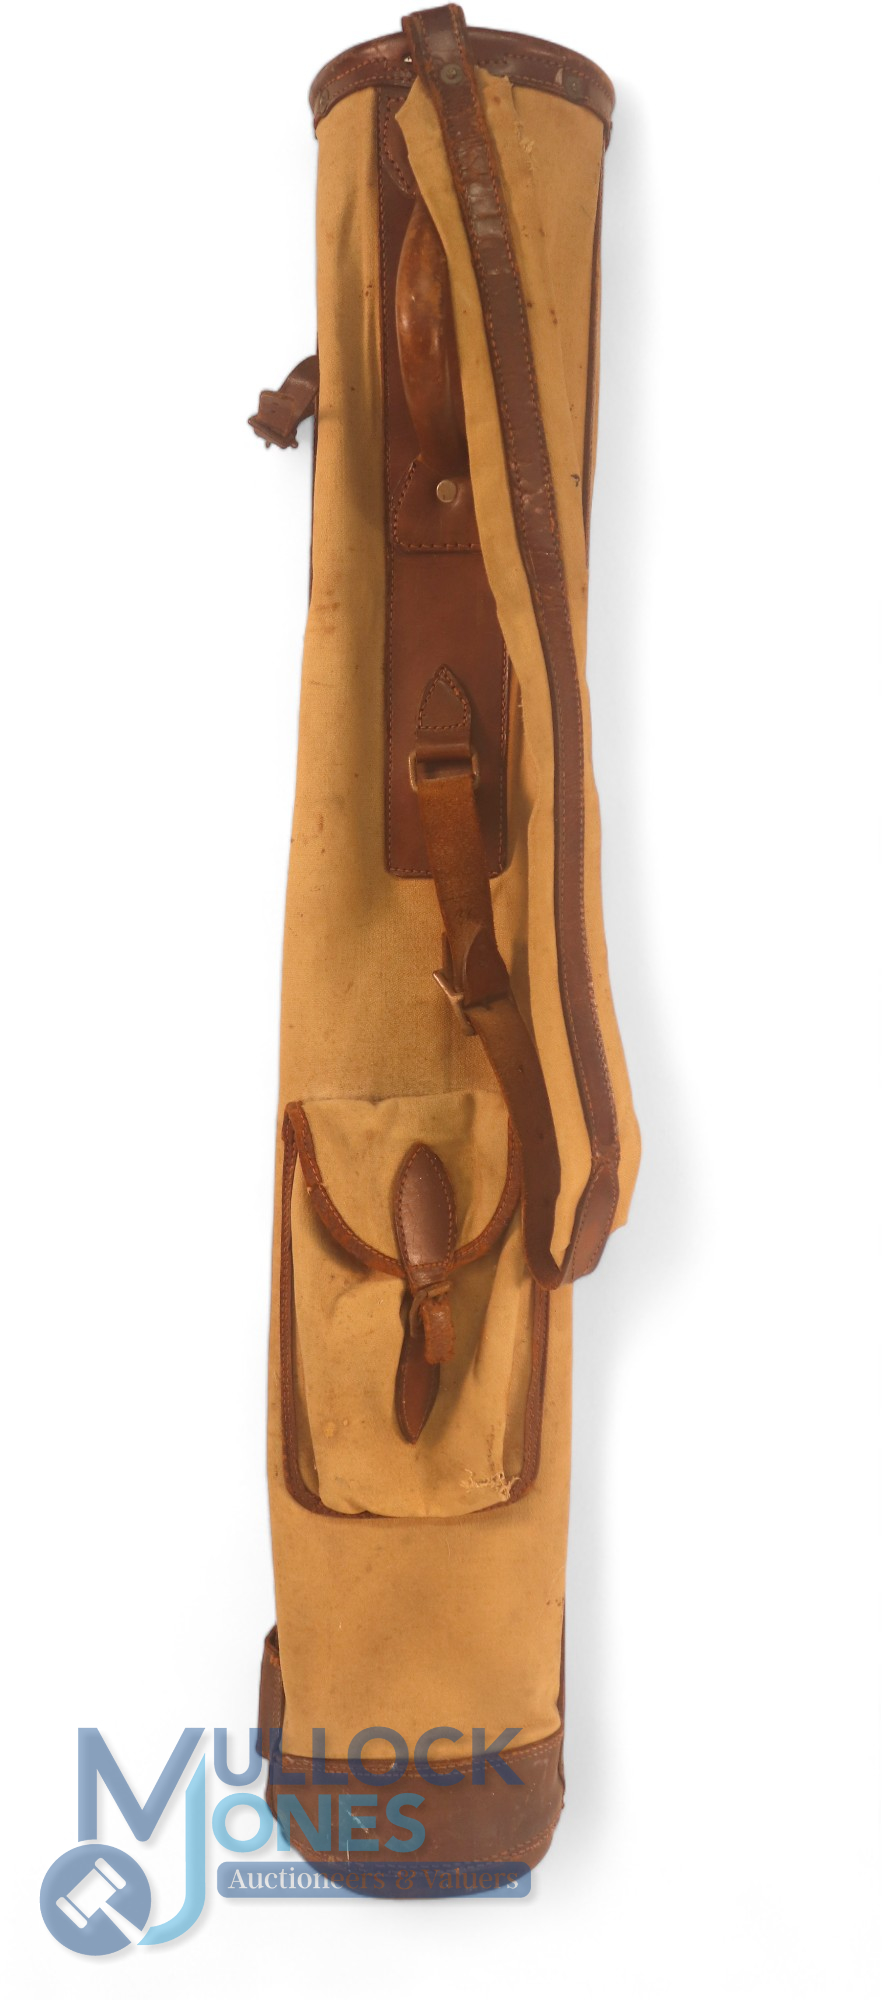 Good rigid Canvas and Leather Sunday Golf Bag c/w carrying strap, umbrella loop and ball pocket